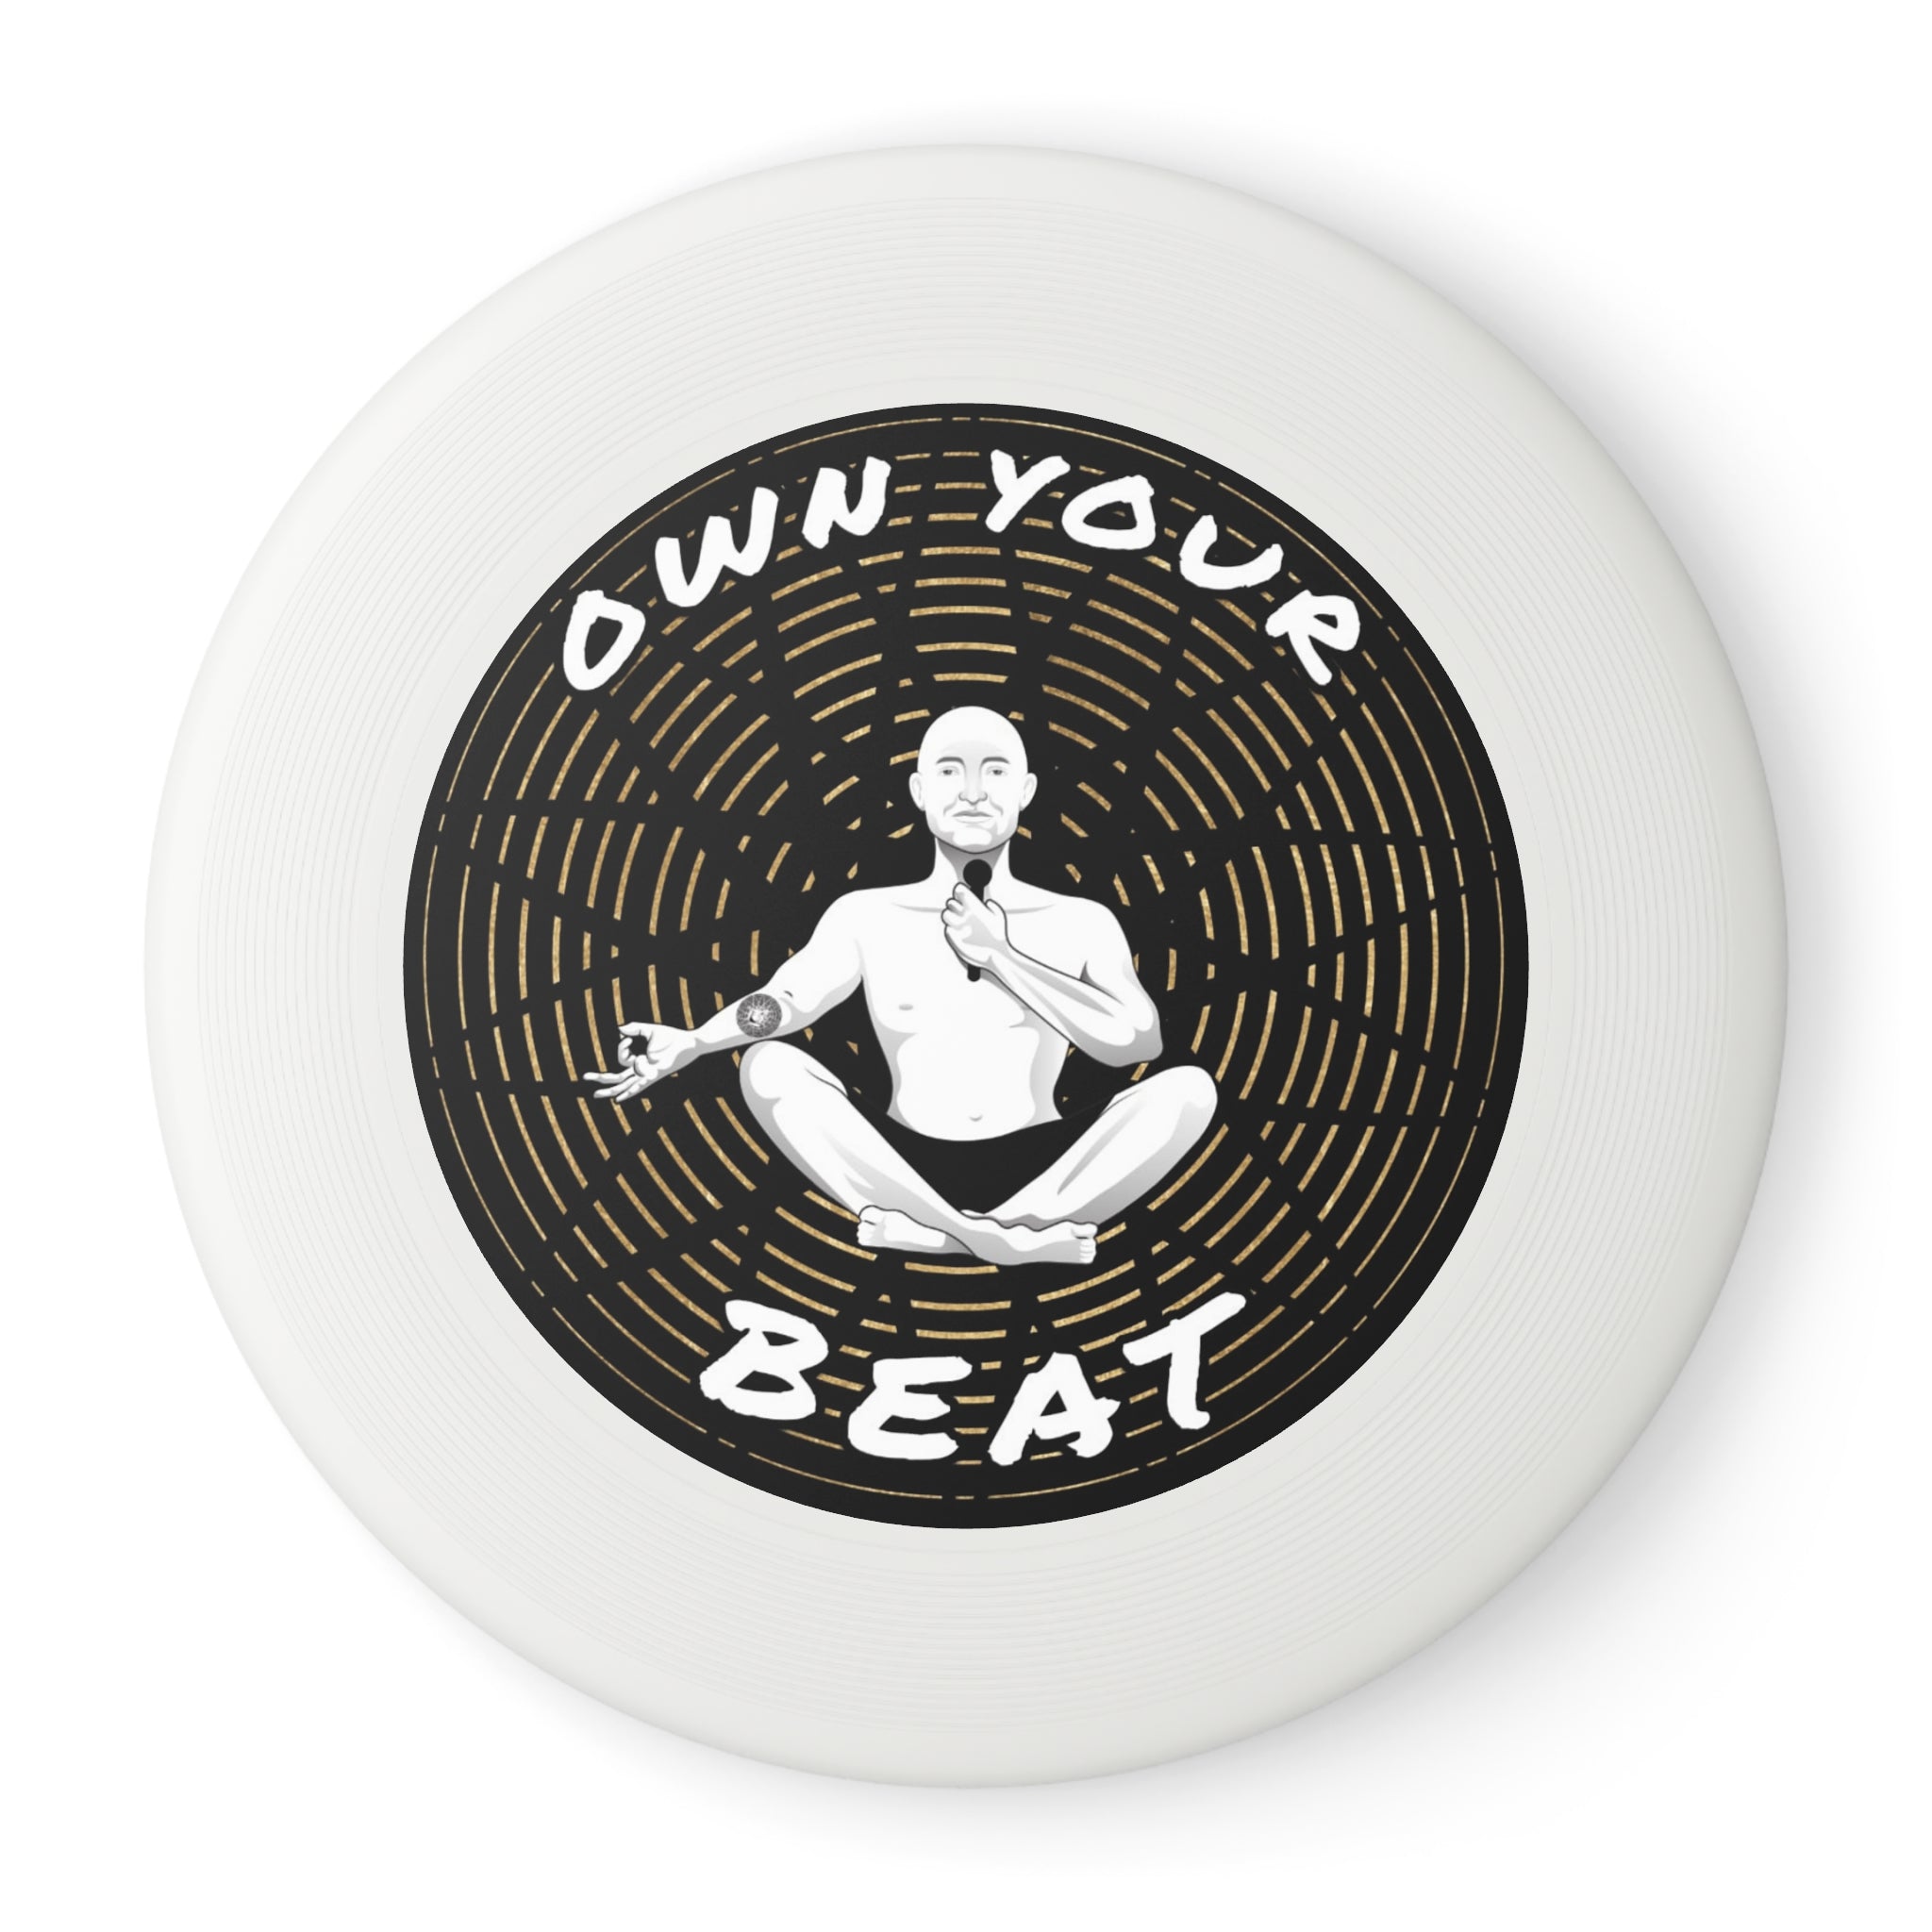 Own Your Beat Frisbee